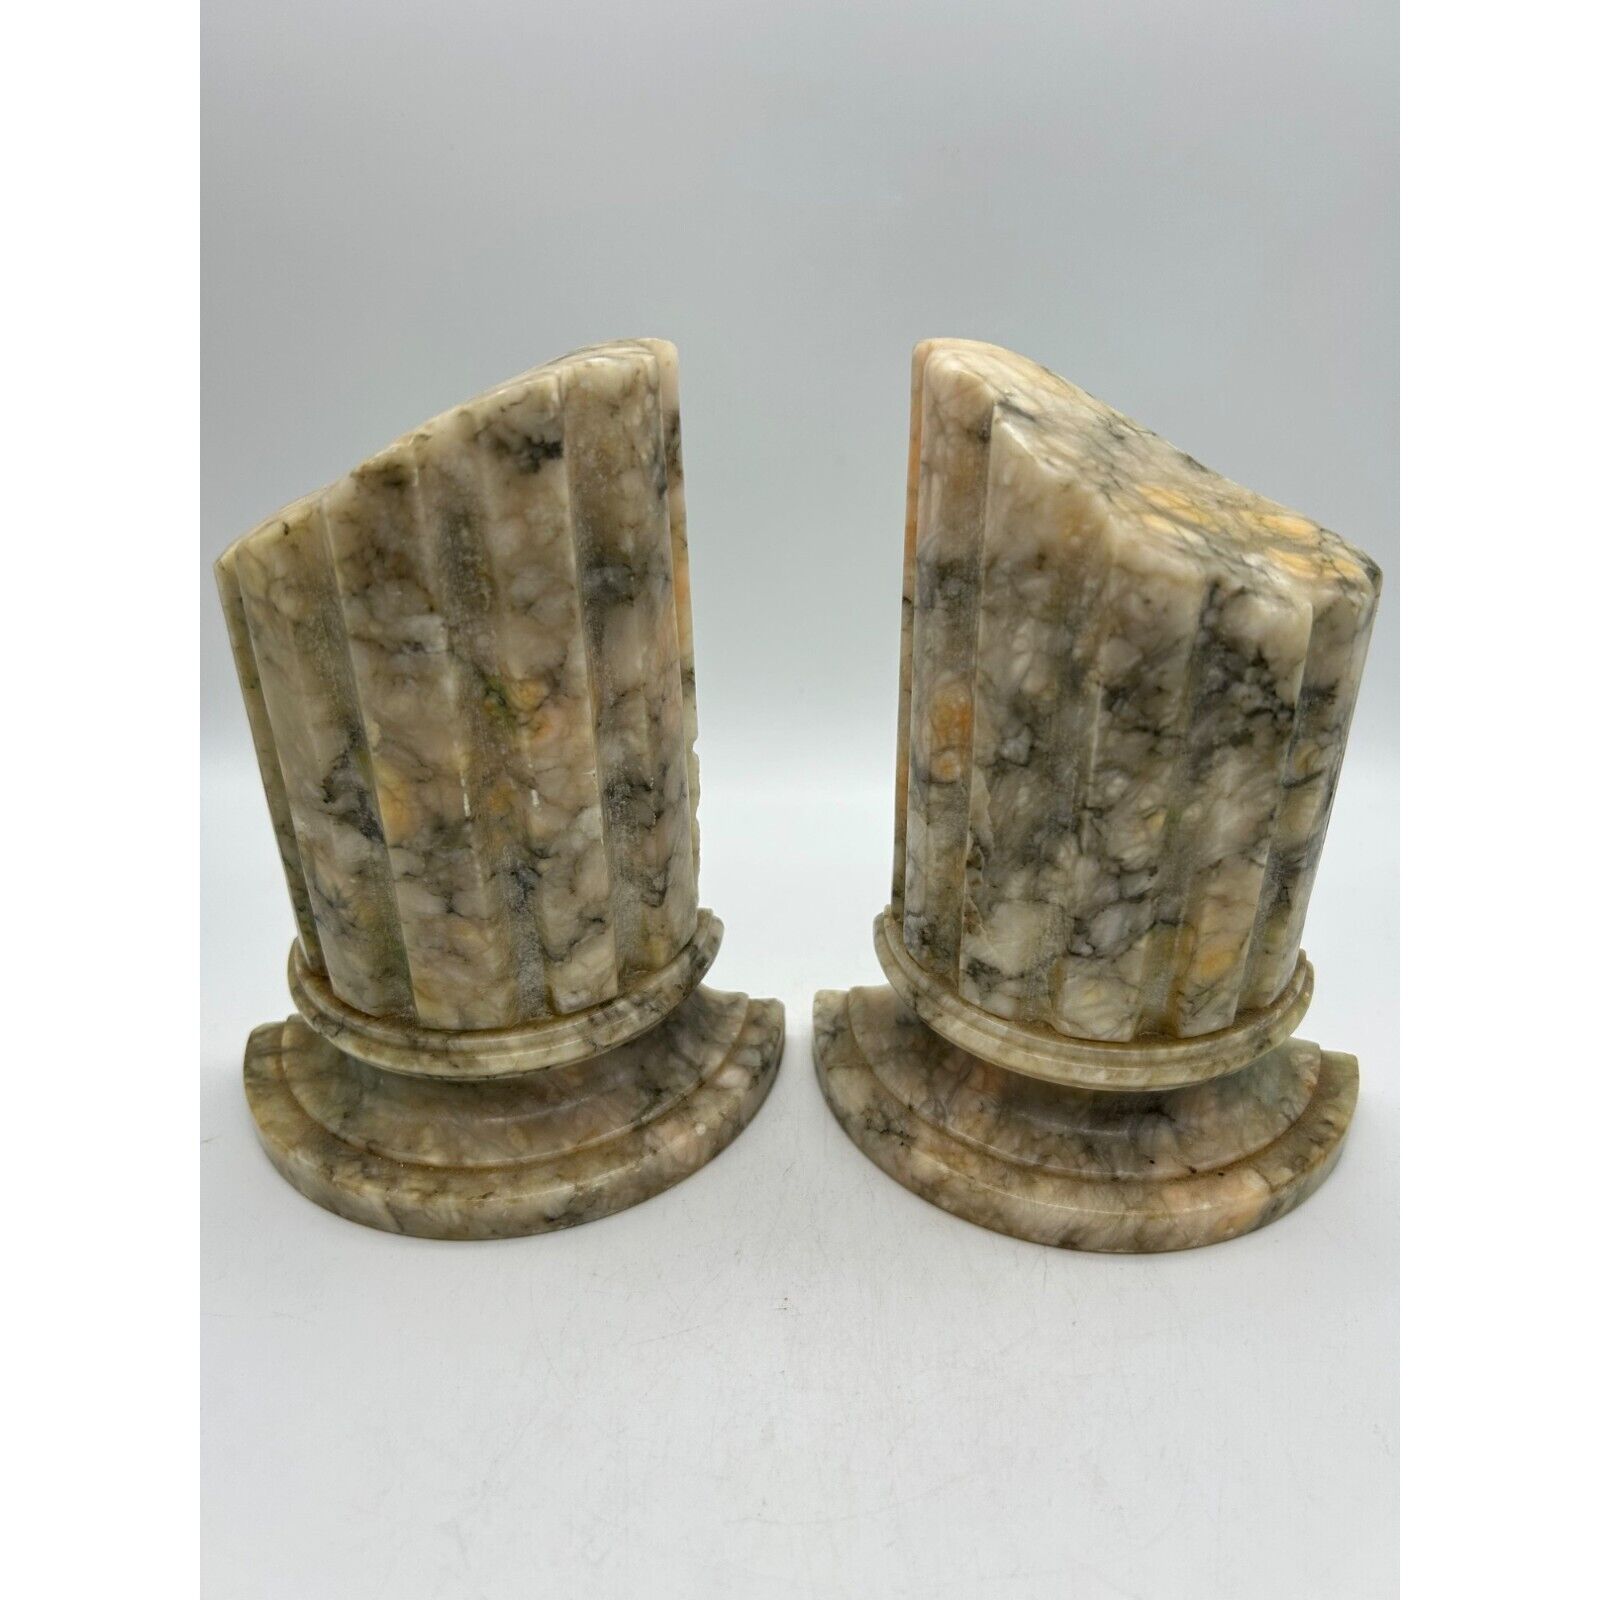 Vintage Italian Hand Carved Alabaster Roman Columns Bookends